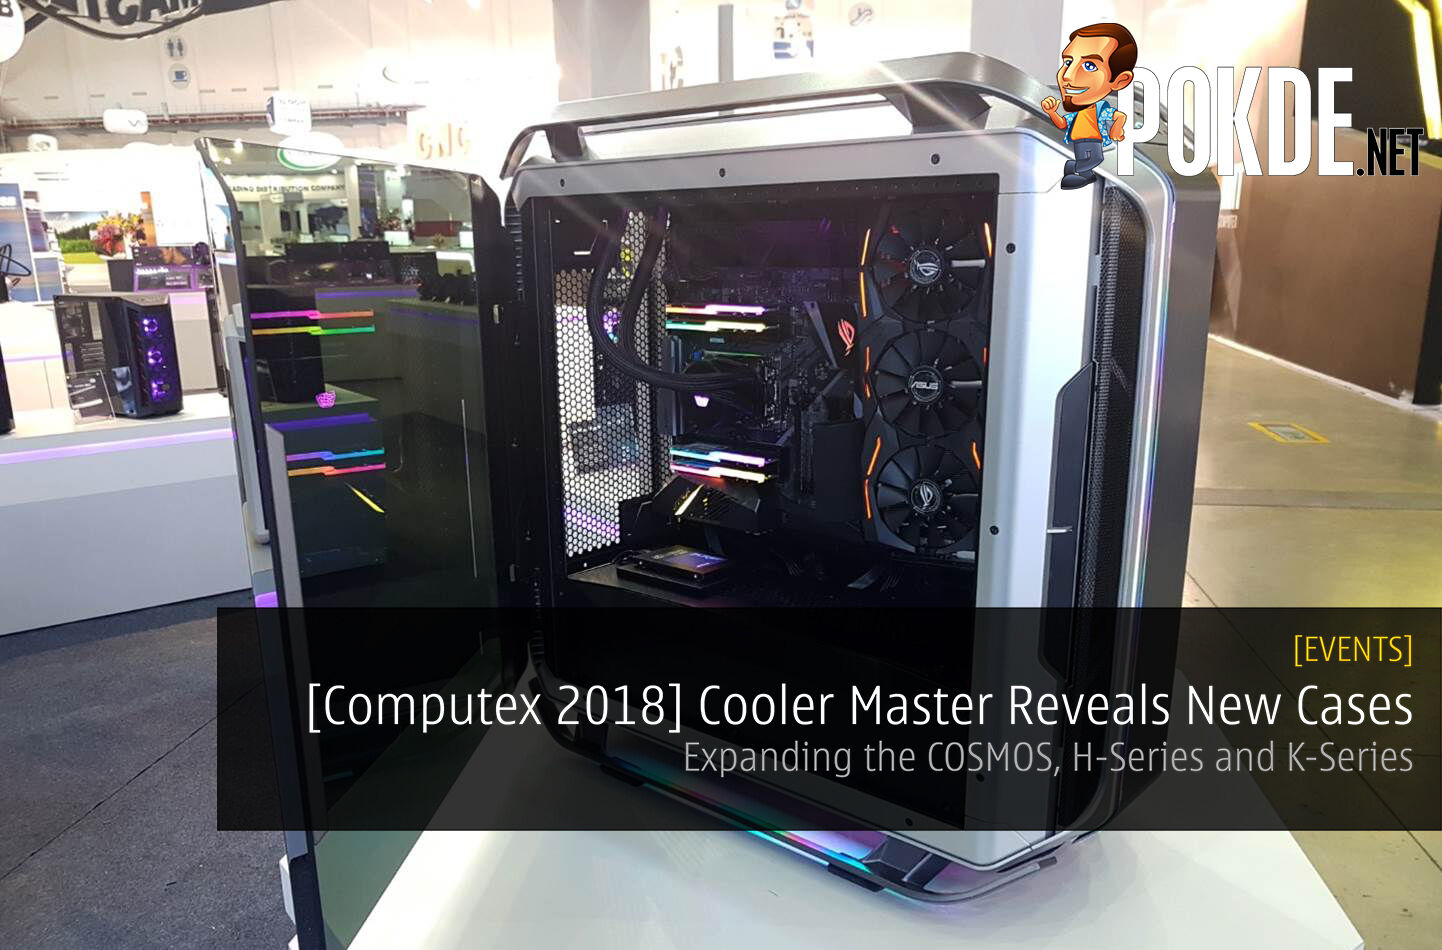 [Computex 2018] Cooler Master Reveals New Case Lineup - Expanding the COSMOS, H-Series and K-Series 37